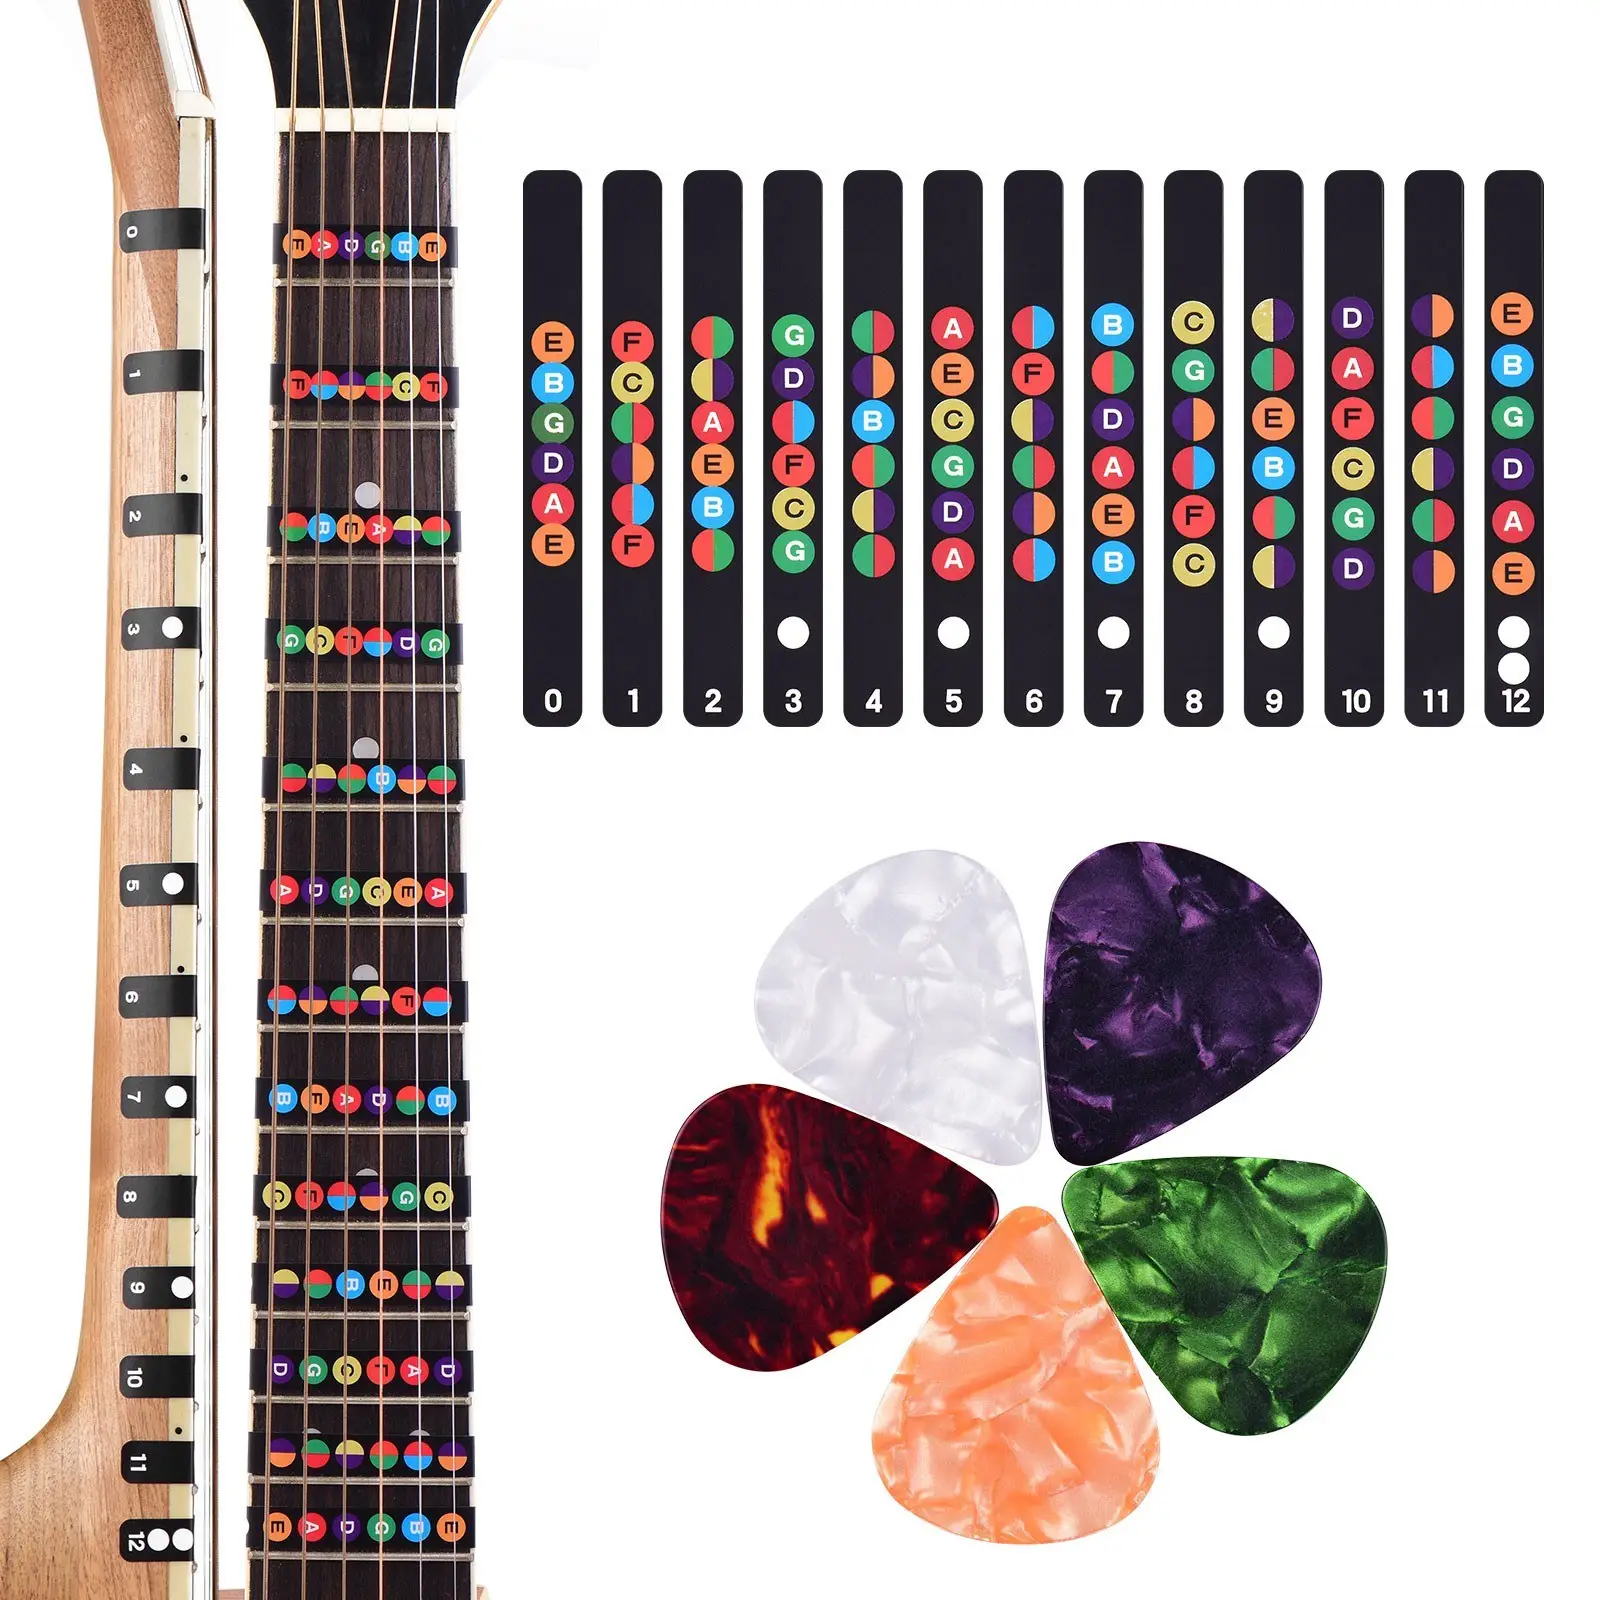 Guitar Fretboard Stickers Colorful Fingerboard Sticker Note Decals for 6 String Acoustic Electric Guitars Beginners Practice Ass